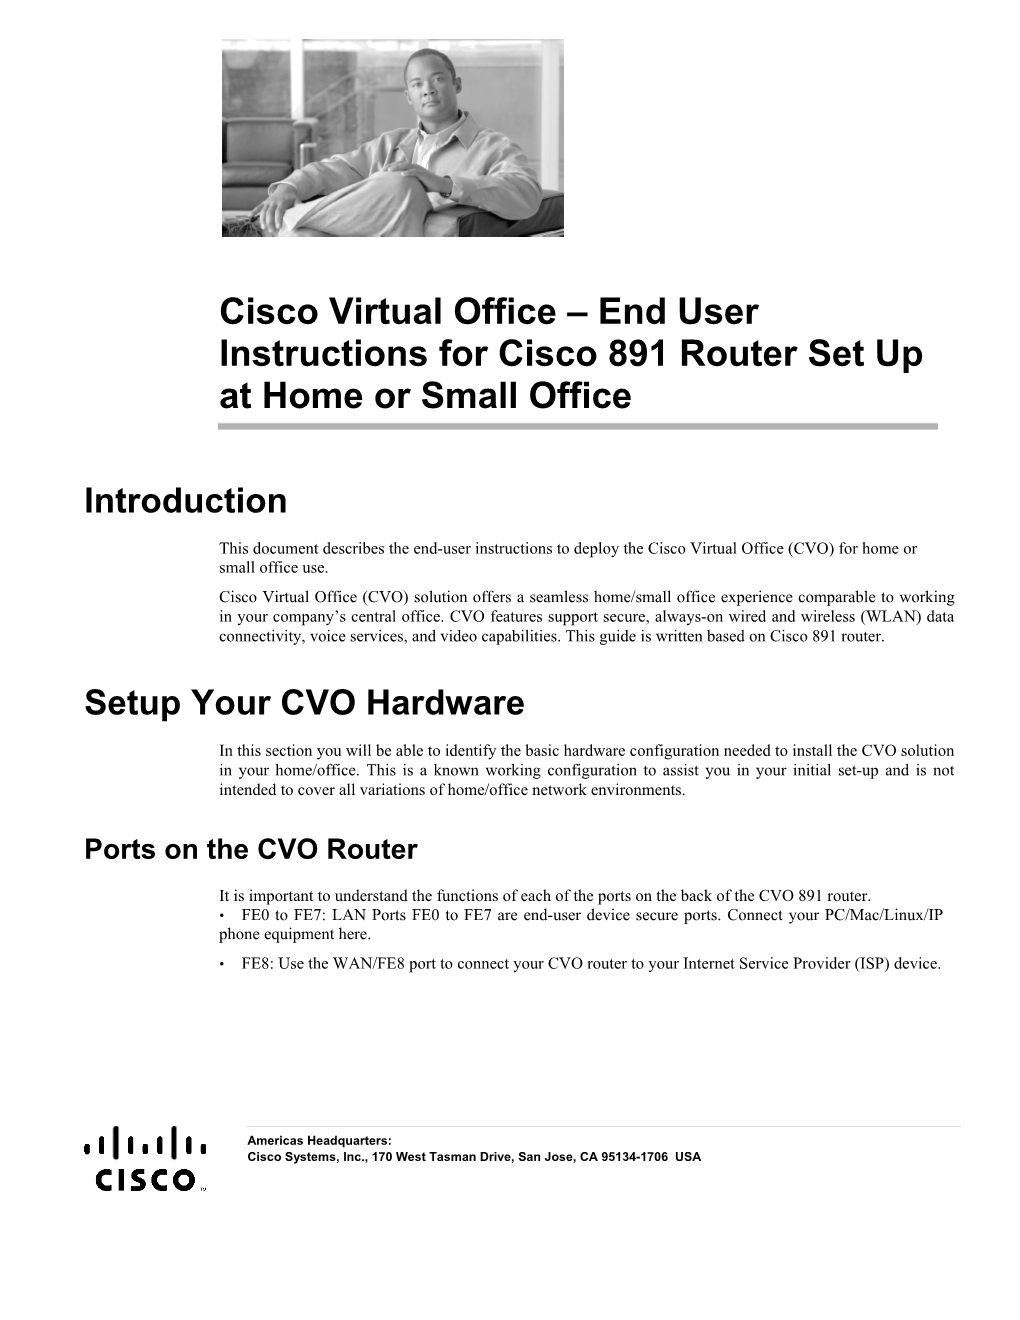 Cisco Virtual Office End User Instructions for Cisco 891 Router Set up at Home Or Small Office